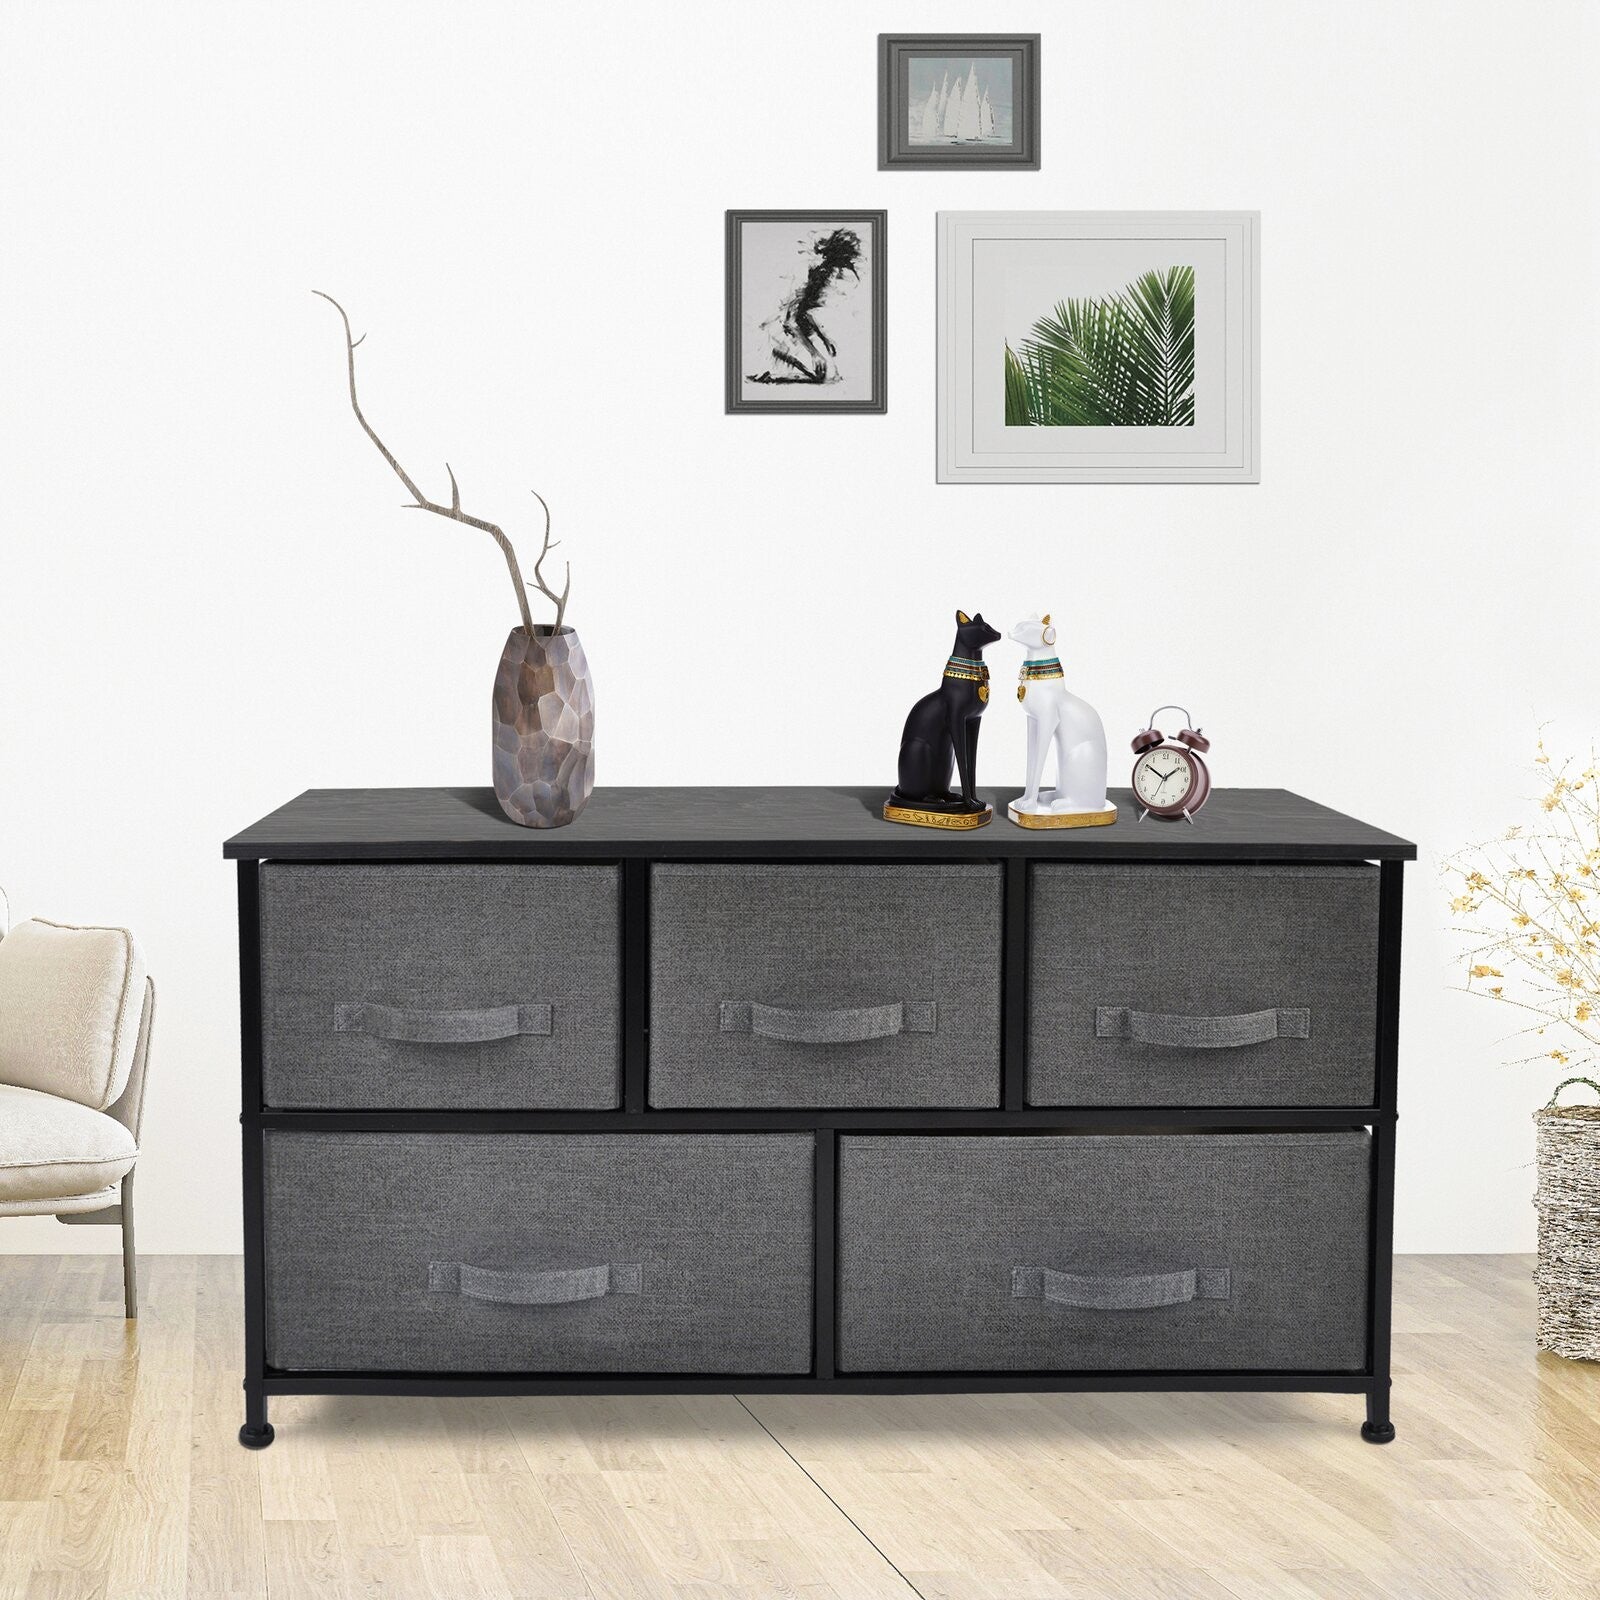 39" Black And Dark Fabric and Steel Accent Chest With Two Shelves And Five Drawers